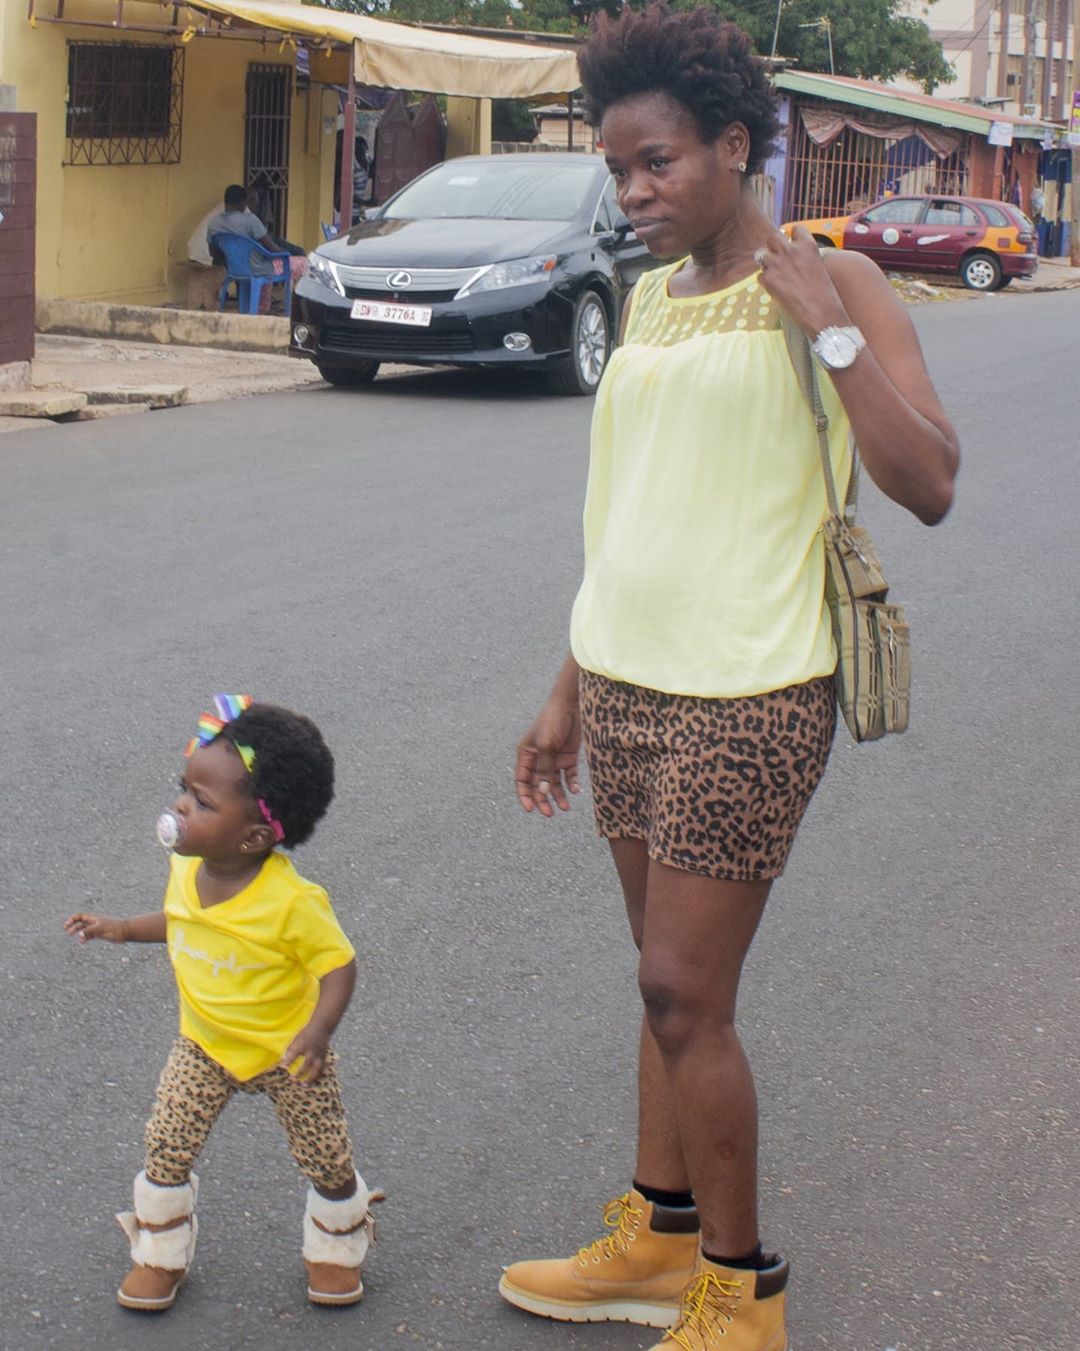 Ohemaa woyeje slays with her pretty daughter in latest photos